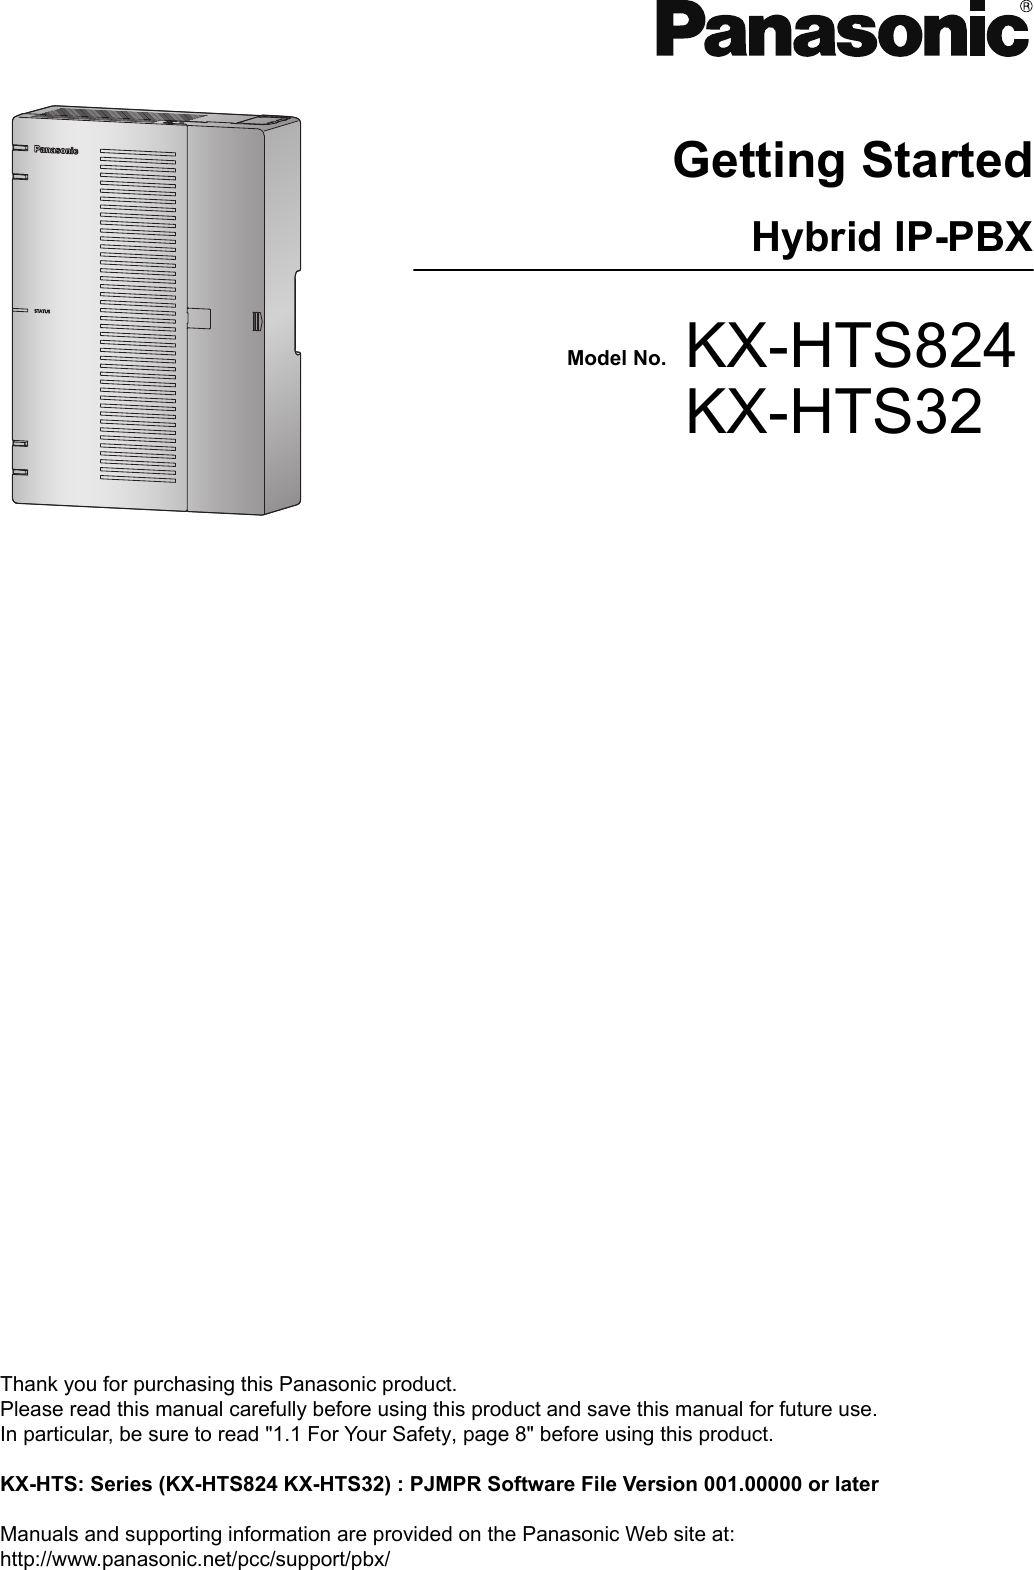 Getting StartedHybrid IP-PBXModel No. KX-HTS824KX-HTS32Thank you for purchasing this Panasonic product.Please read this manual carefully before using this product and save this manual for future use.In particular, be sure to read &quot;1.1 For Your Safety, page 8&quot; before using this product. KX-HTS: Series (KX-HTS824 KX-HTS32) : PJMPR Software File Version 001.00000 or later Manuals and supporting information are provided on the Panasonic Web site at:http://www.panasonic.net/pcc/support/pbx/